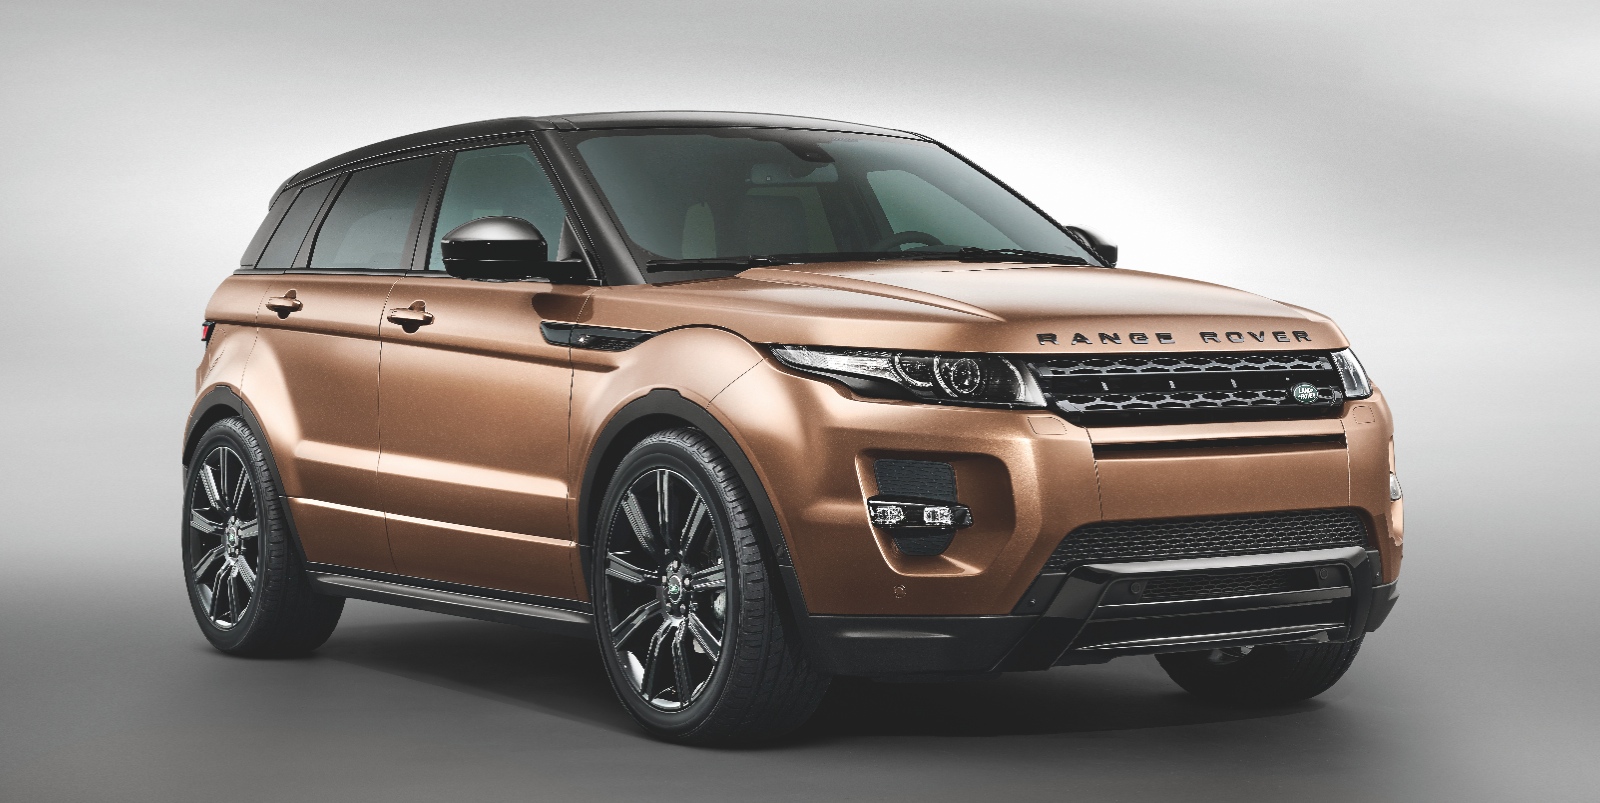 2014 Range Rover Evoque Is 11 More Efficient Thanks to 9